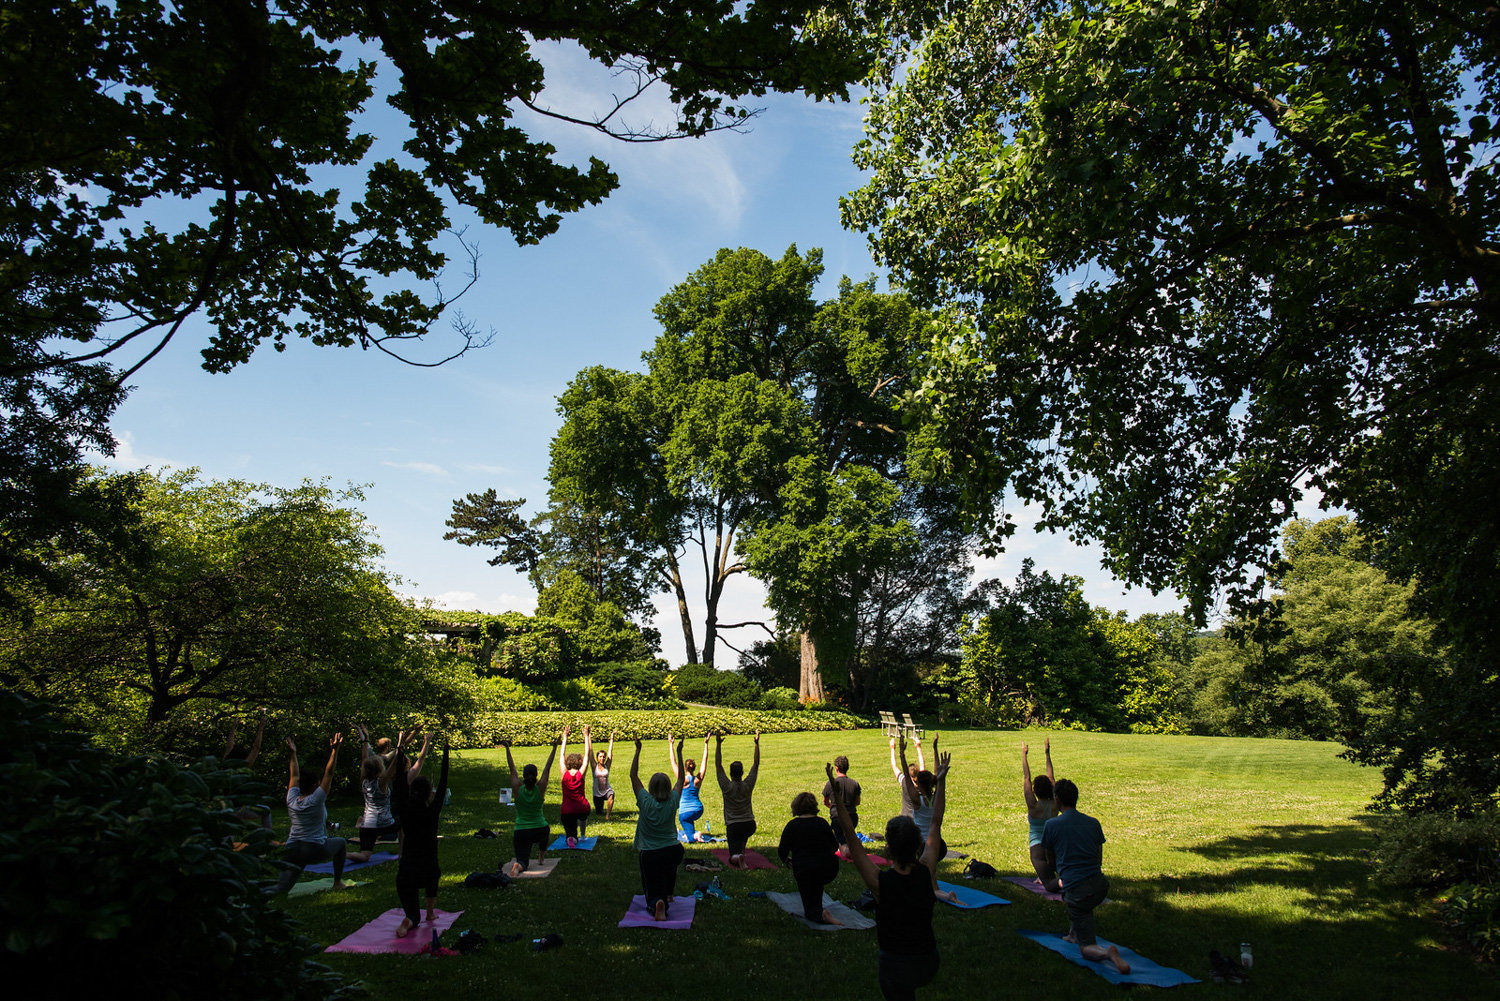 Before the coronavirus pandemic, Wave Hill offered yoga classes on its grounds. Now, the garden offers them online in a bid to keep people healthy while staying home.